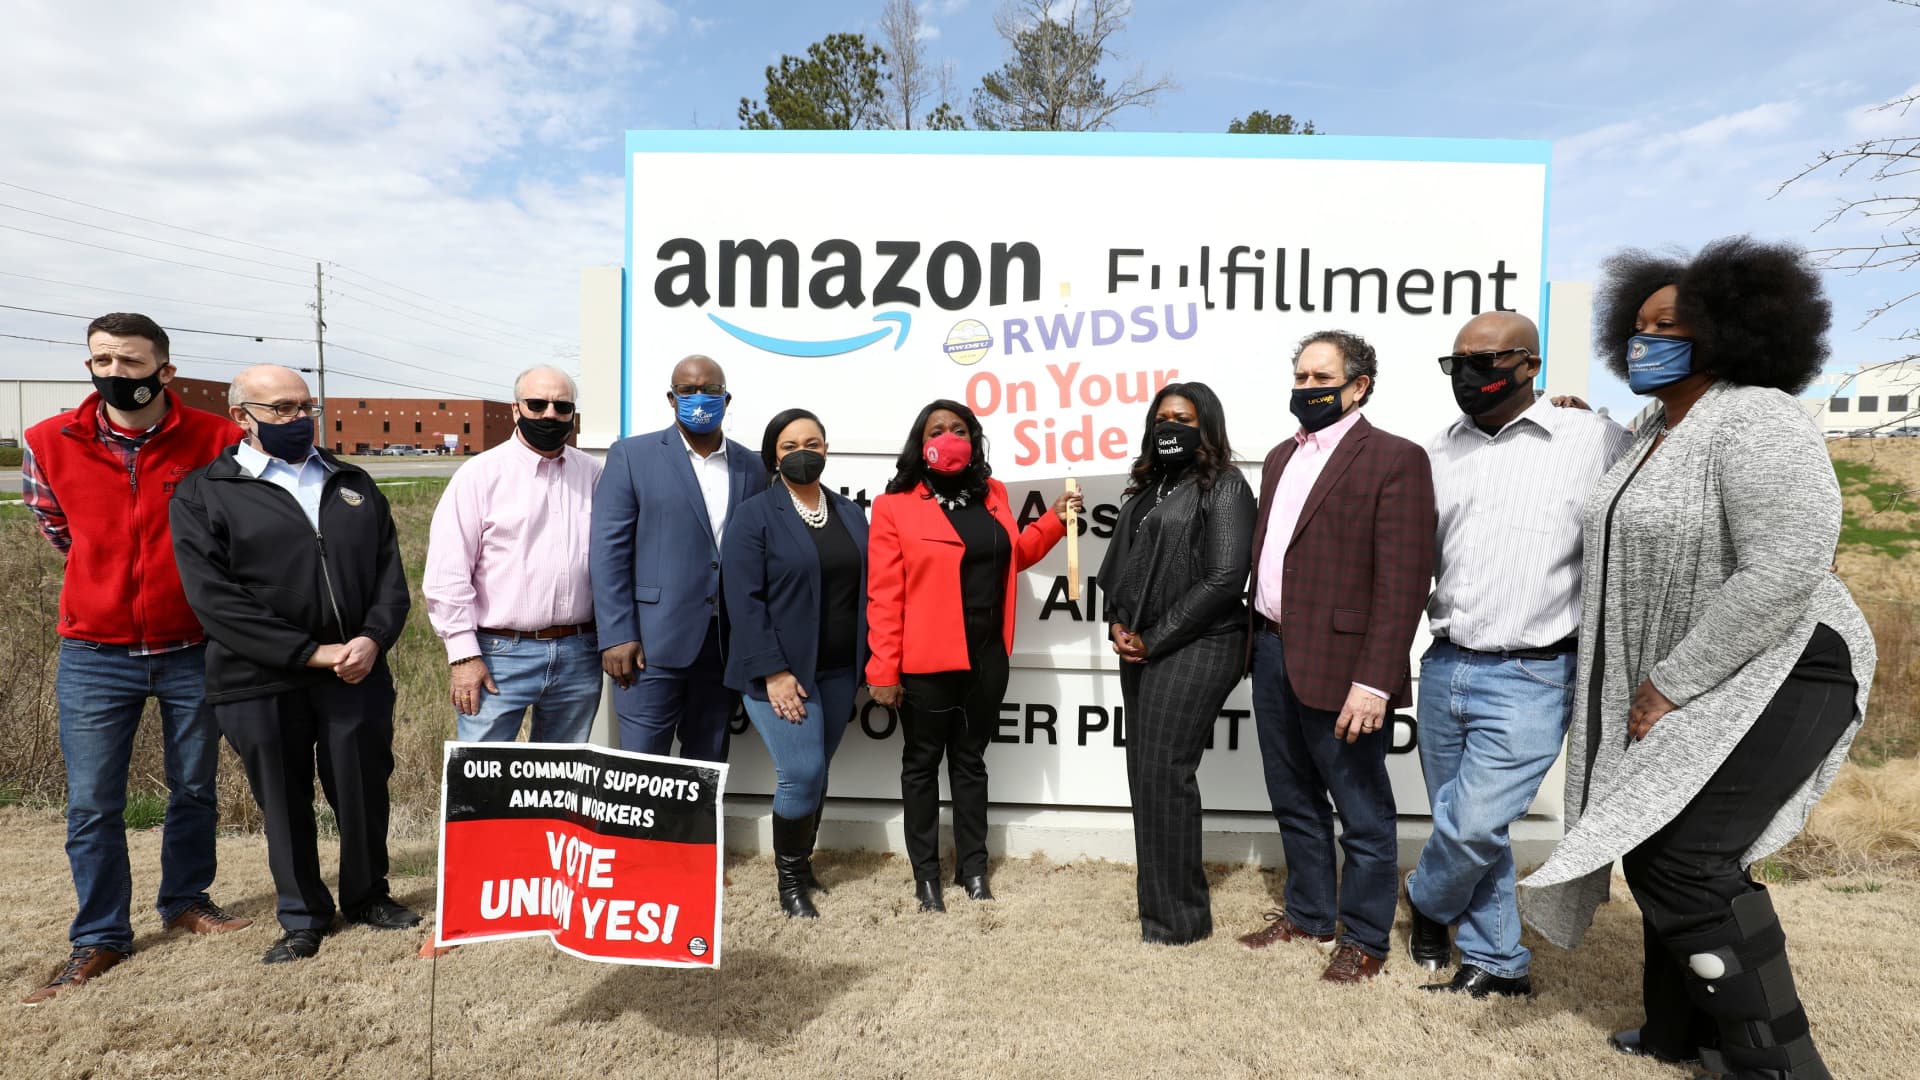 Rep. Nikema Williams, Rep. Jamaal Bowman, Rep. Terri Sewell, Rep. Cori Bush, Rep. Andy Levin and RWDSU President Stuart Appelbaum pose for a picture at the entrance to Amazon facility as they arrive as members of a congressional delegation to show their support for workers who will vote on whether to unionize, in Birmingham, Alabama, U.S. March 5, 2021.